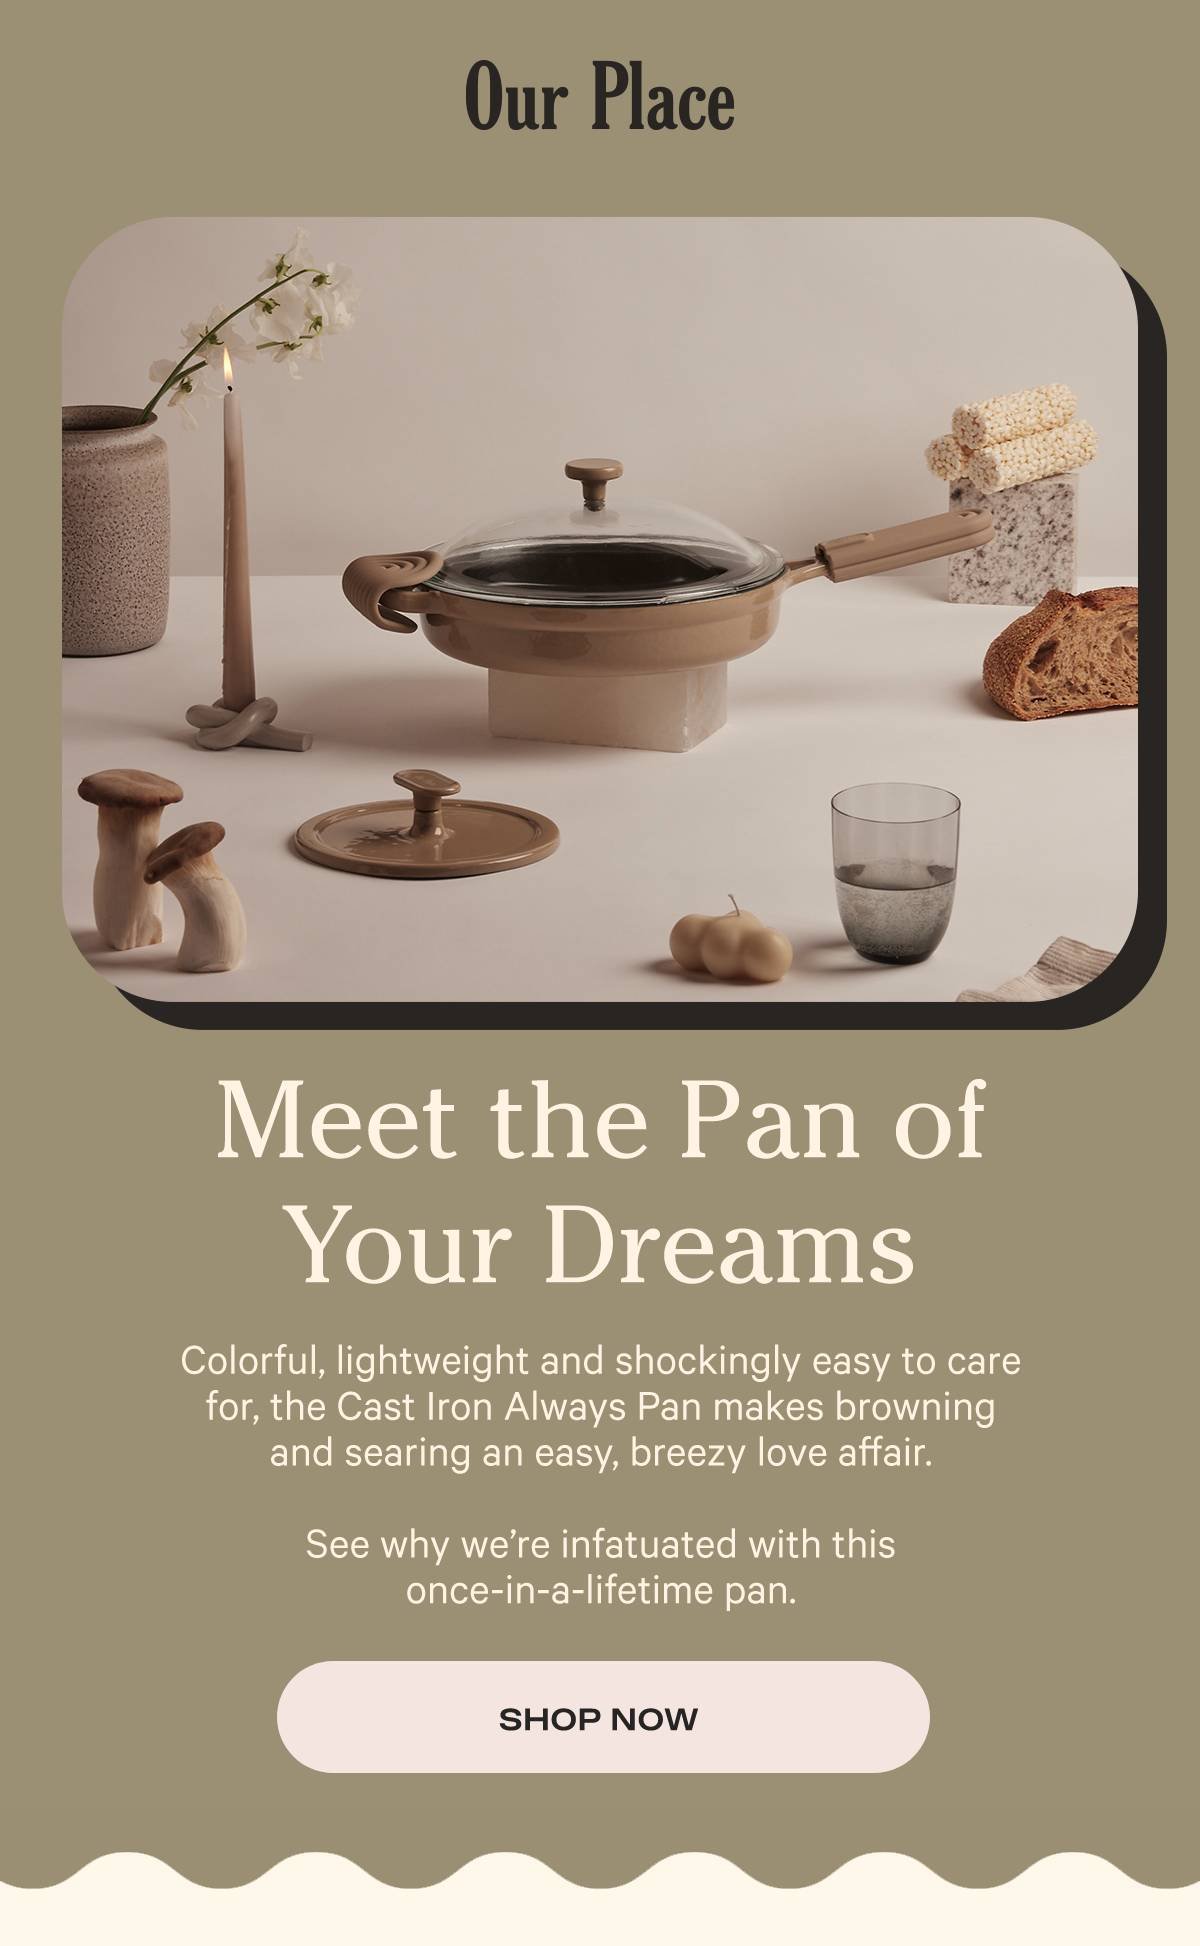 Meet the pan of your dreams